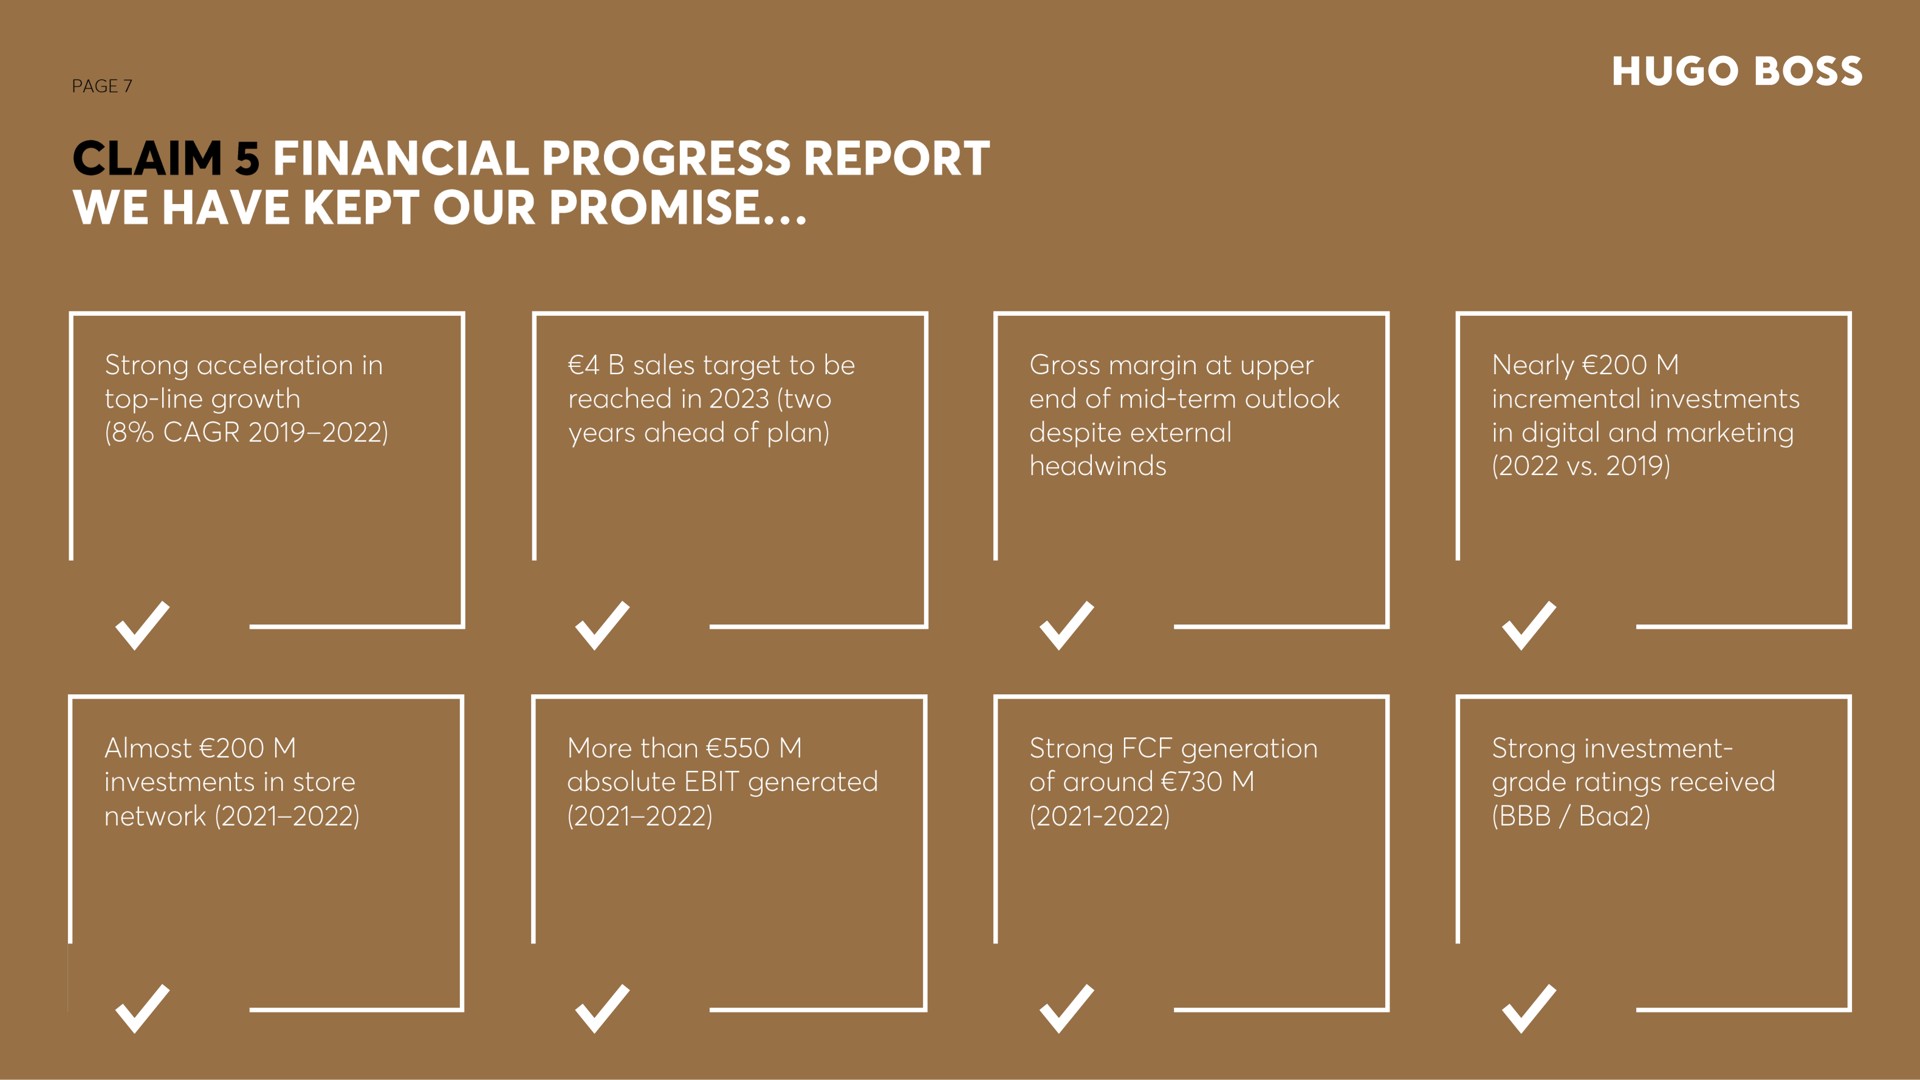 financial progress report we have kept our promise boss a a a | Hugo Boss